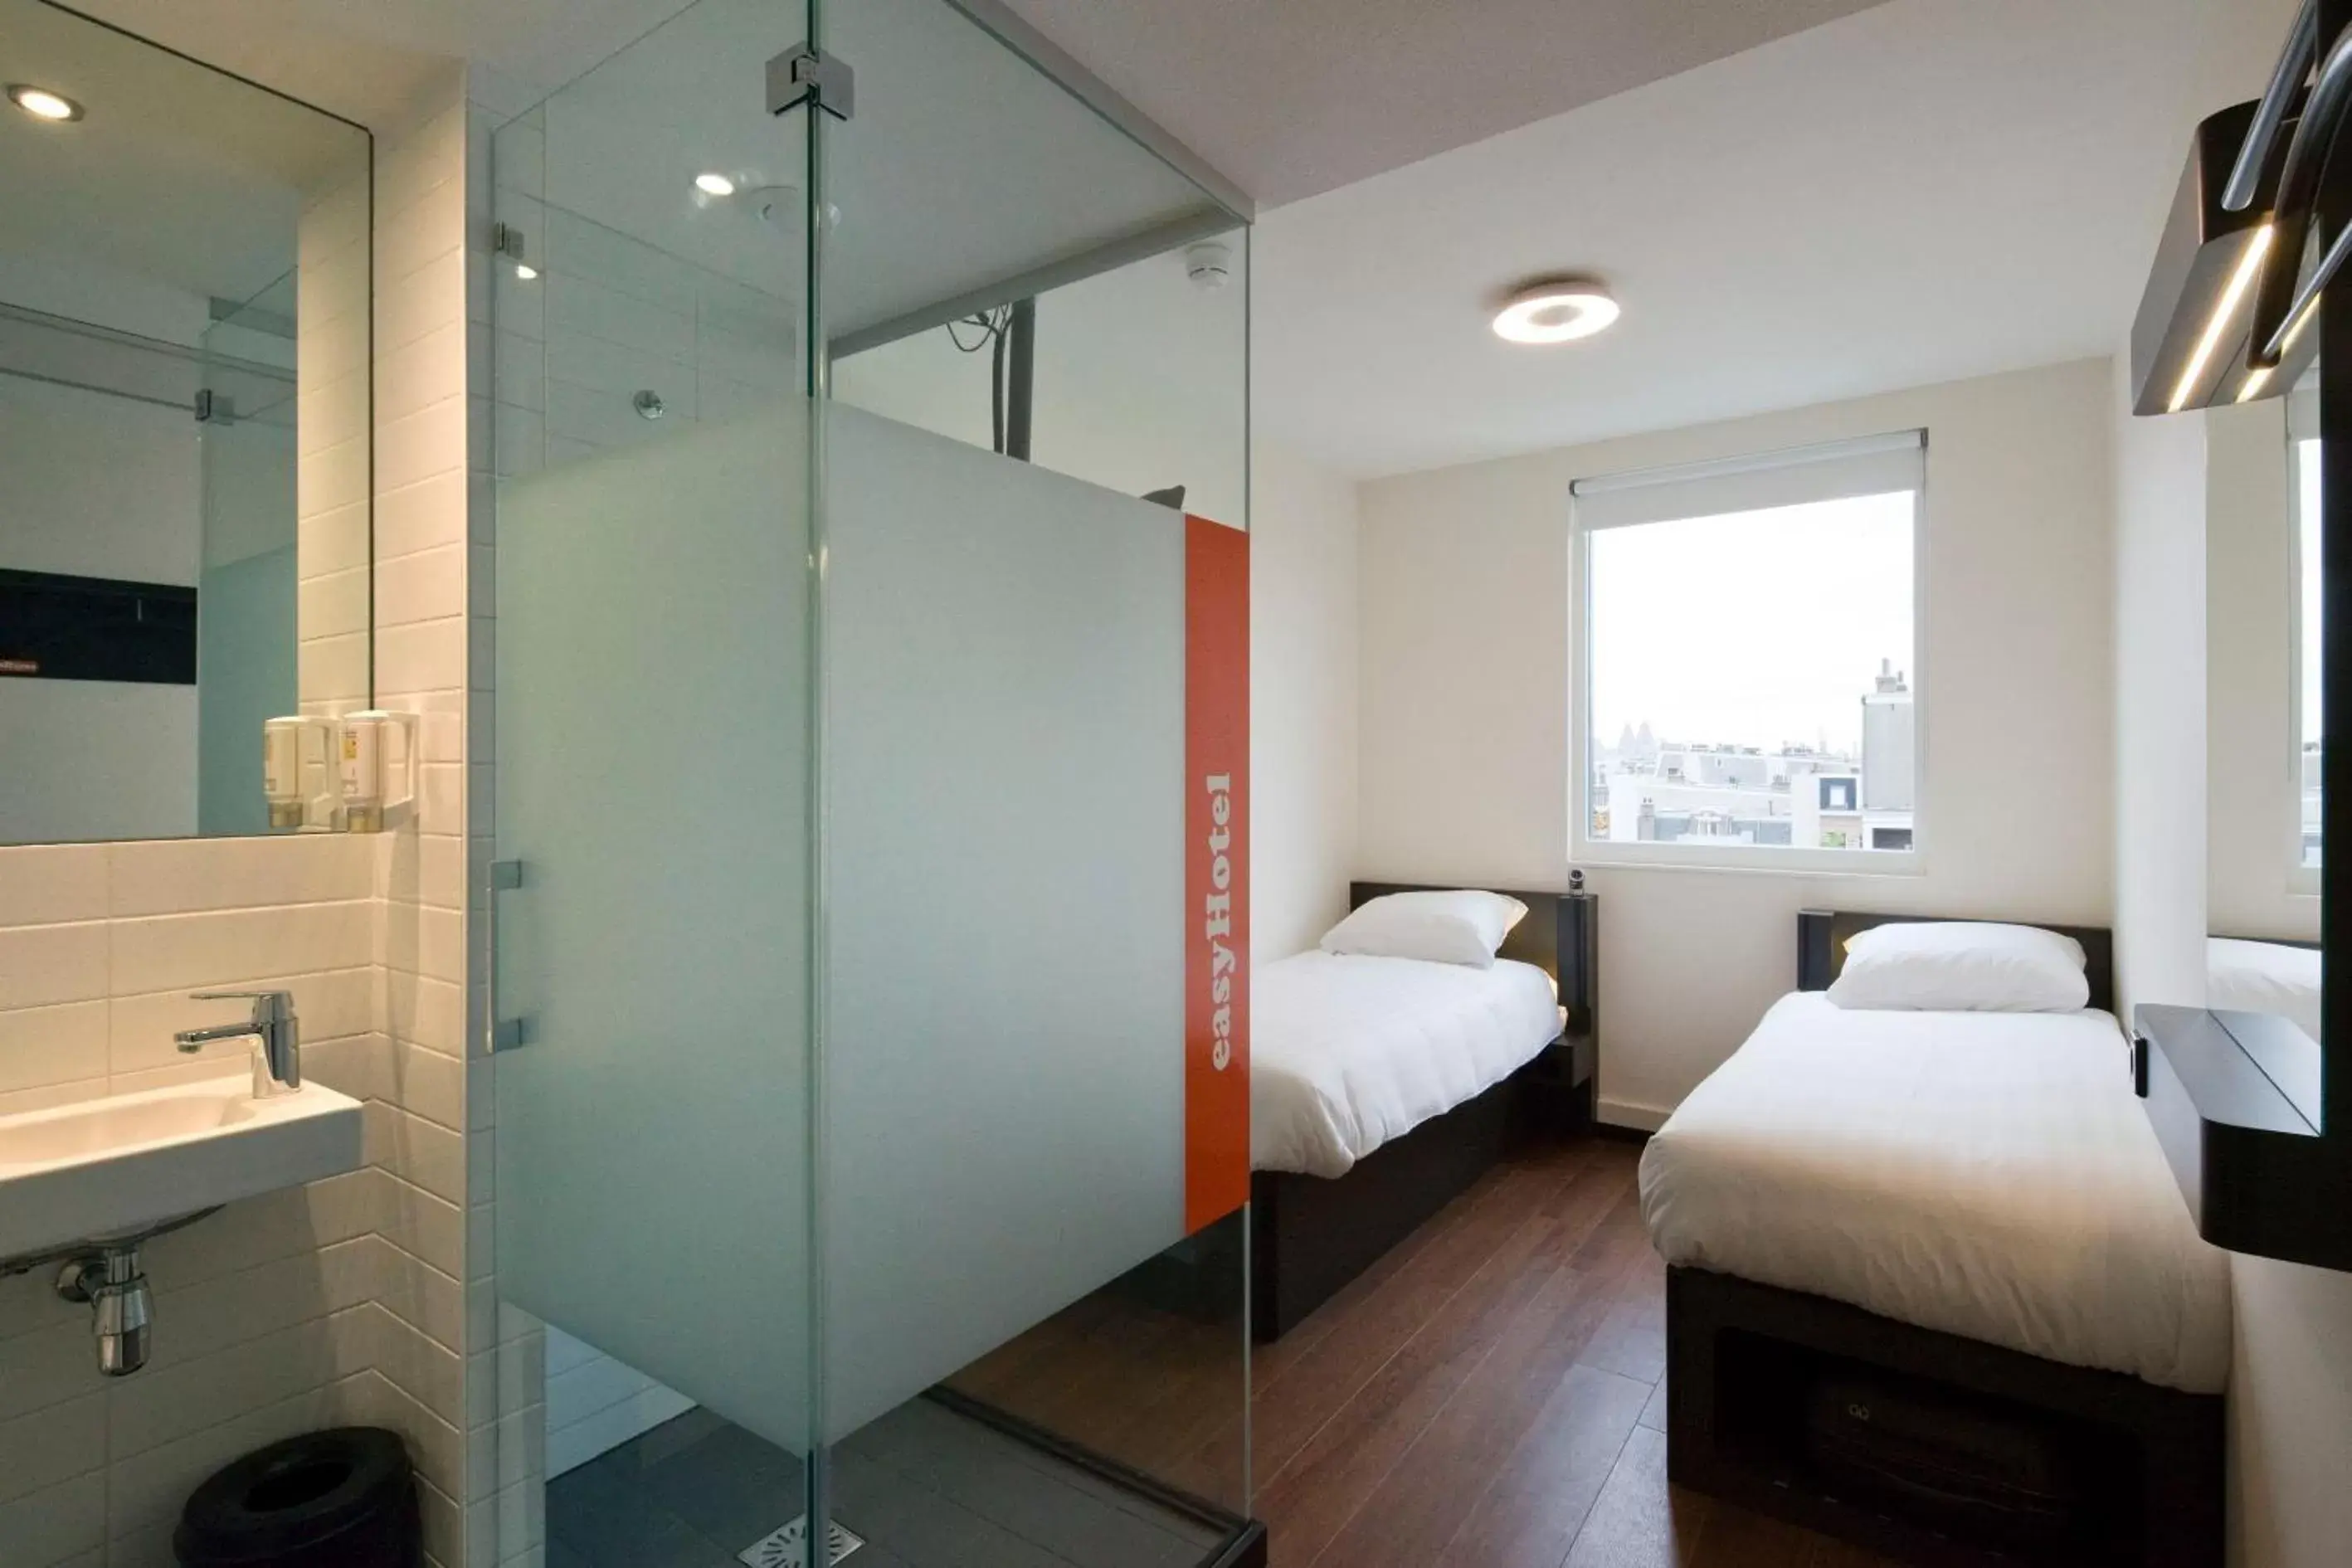 Standard Economy Twin Room in easyHotel Amsterdam City Centre South